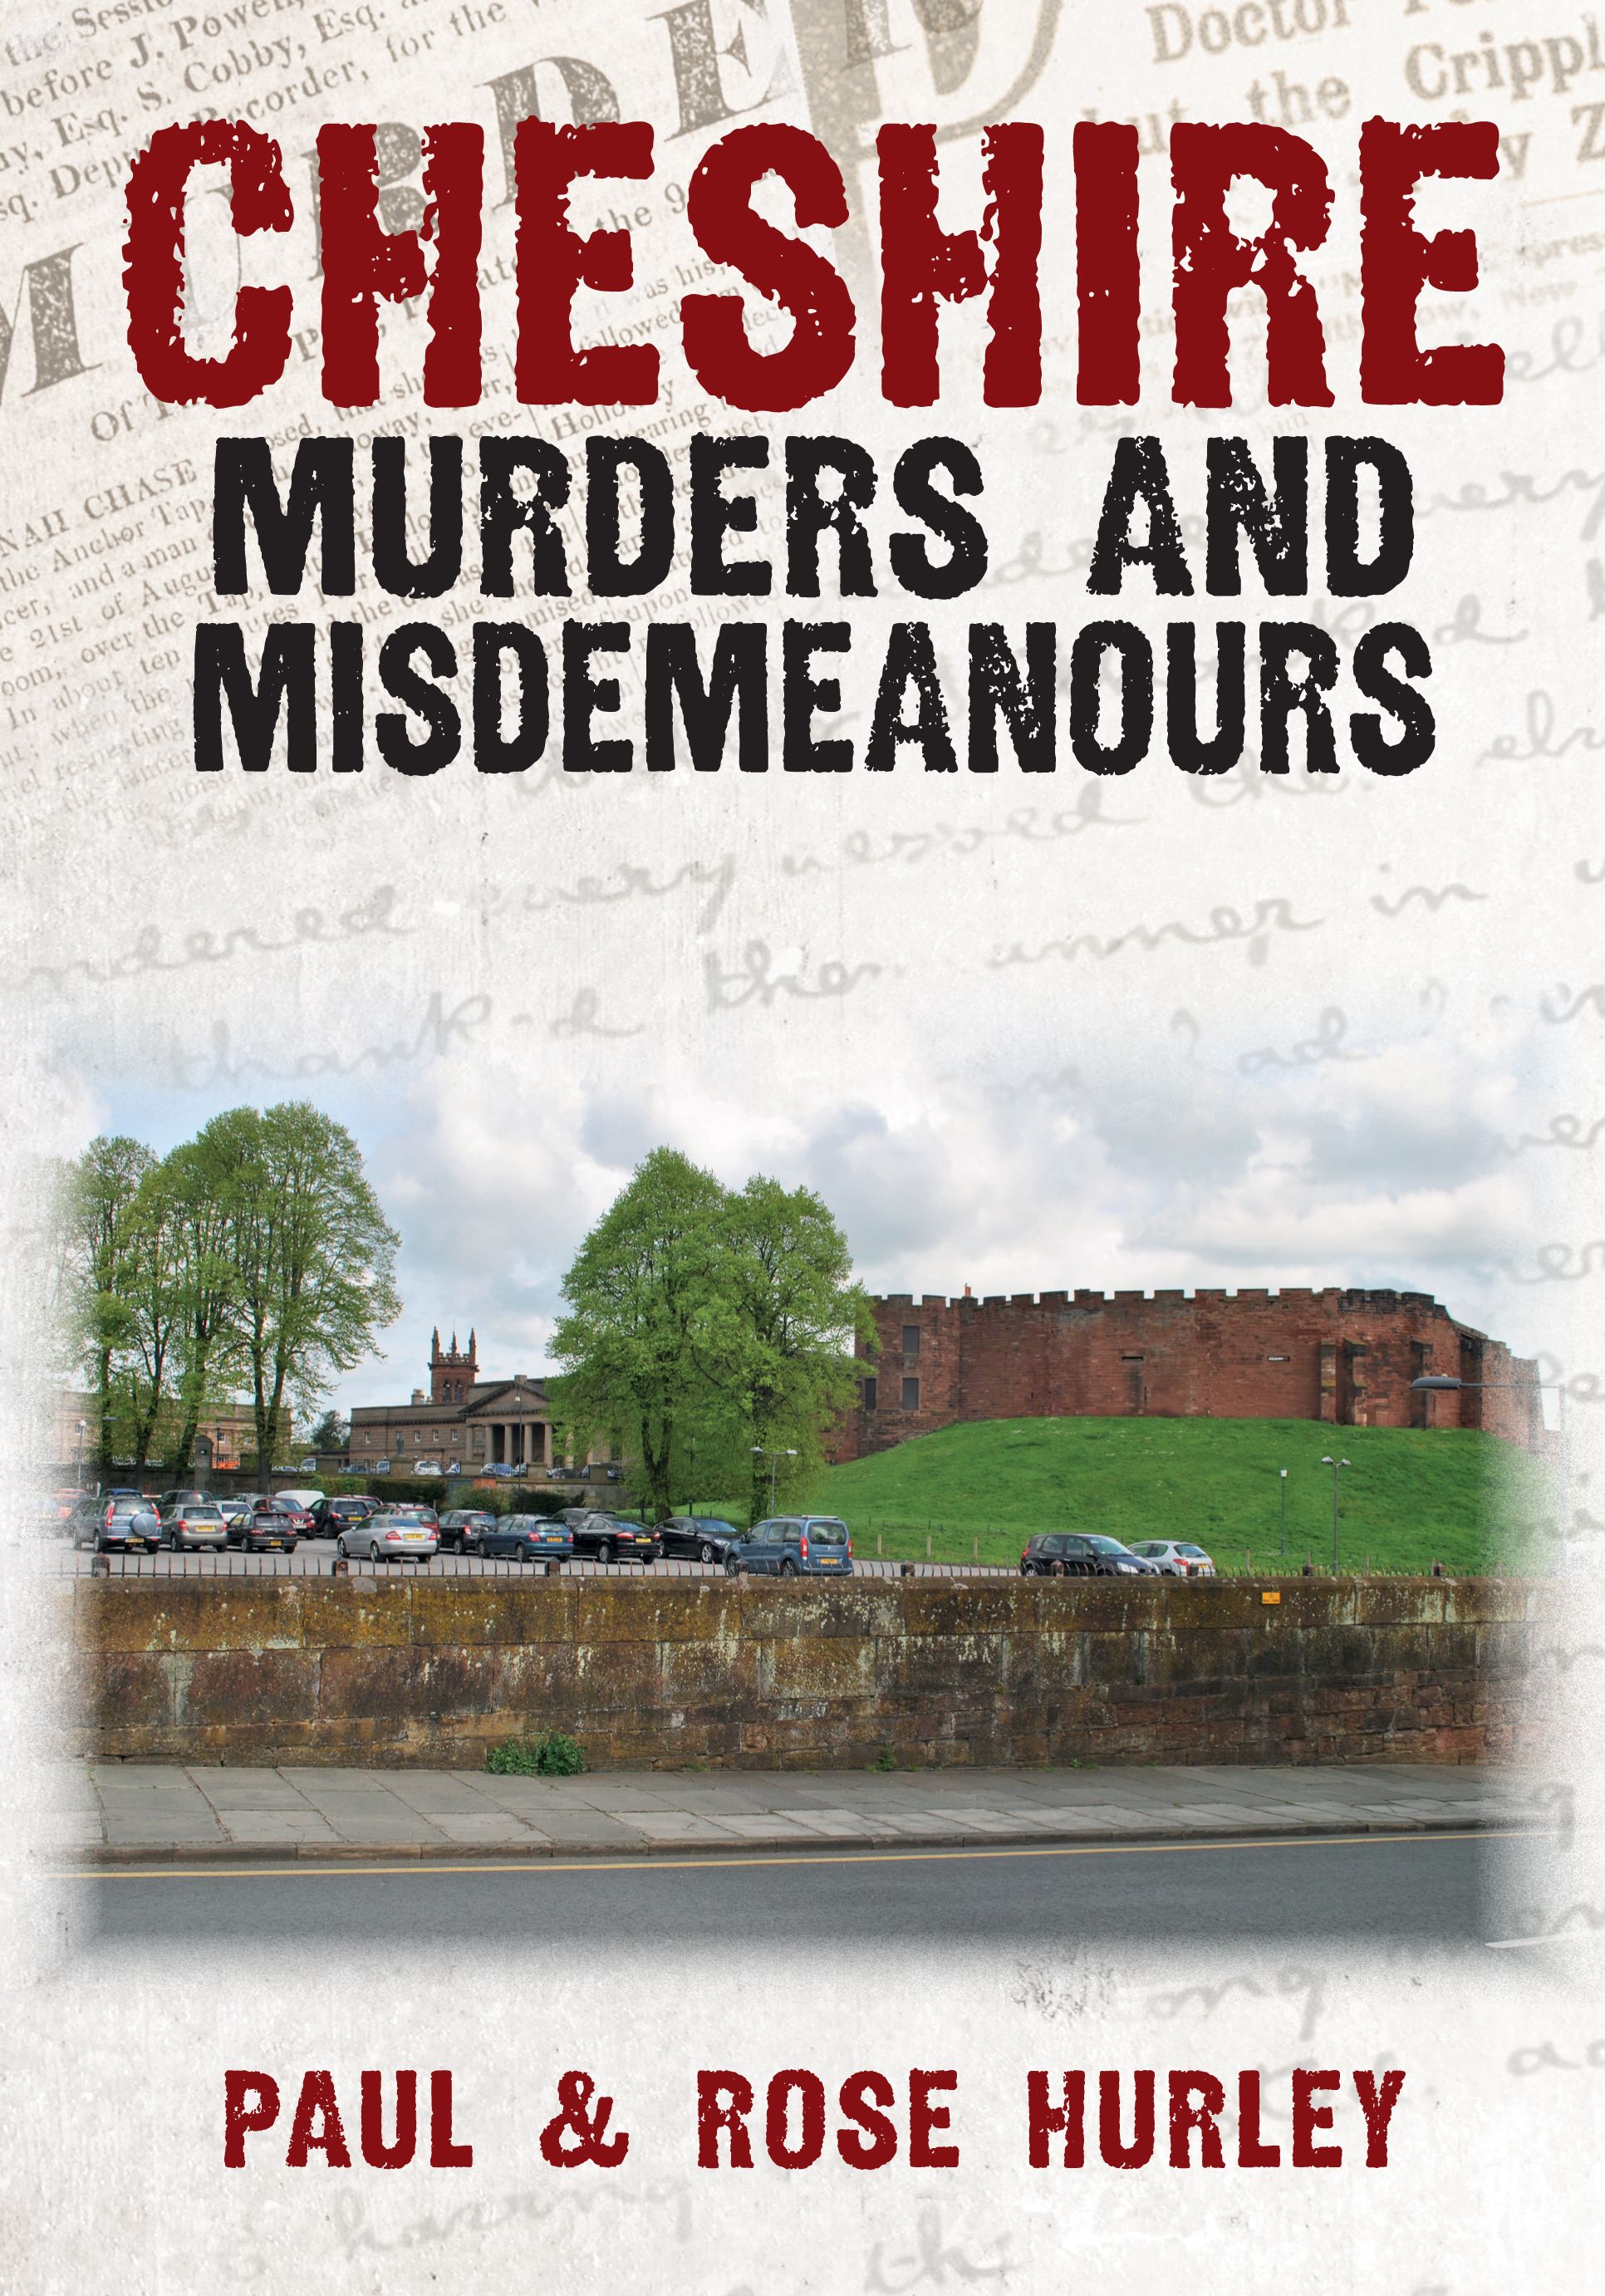 Cheshire Murders and Misdemeanours - Paul & Rose Hurley - Chester Model Centre